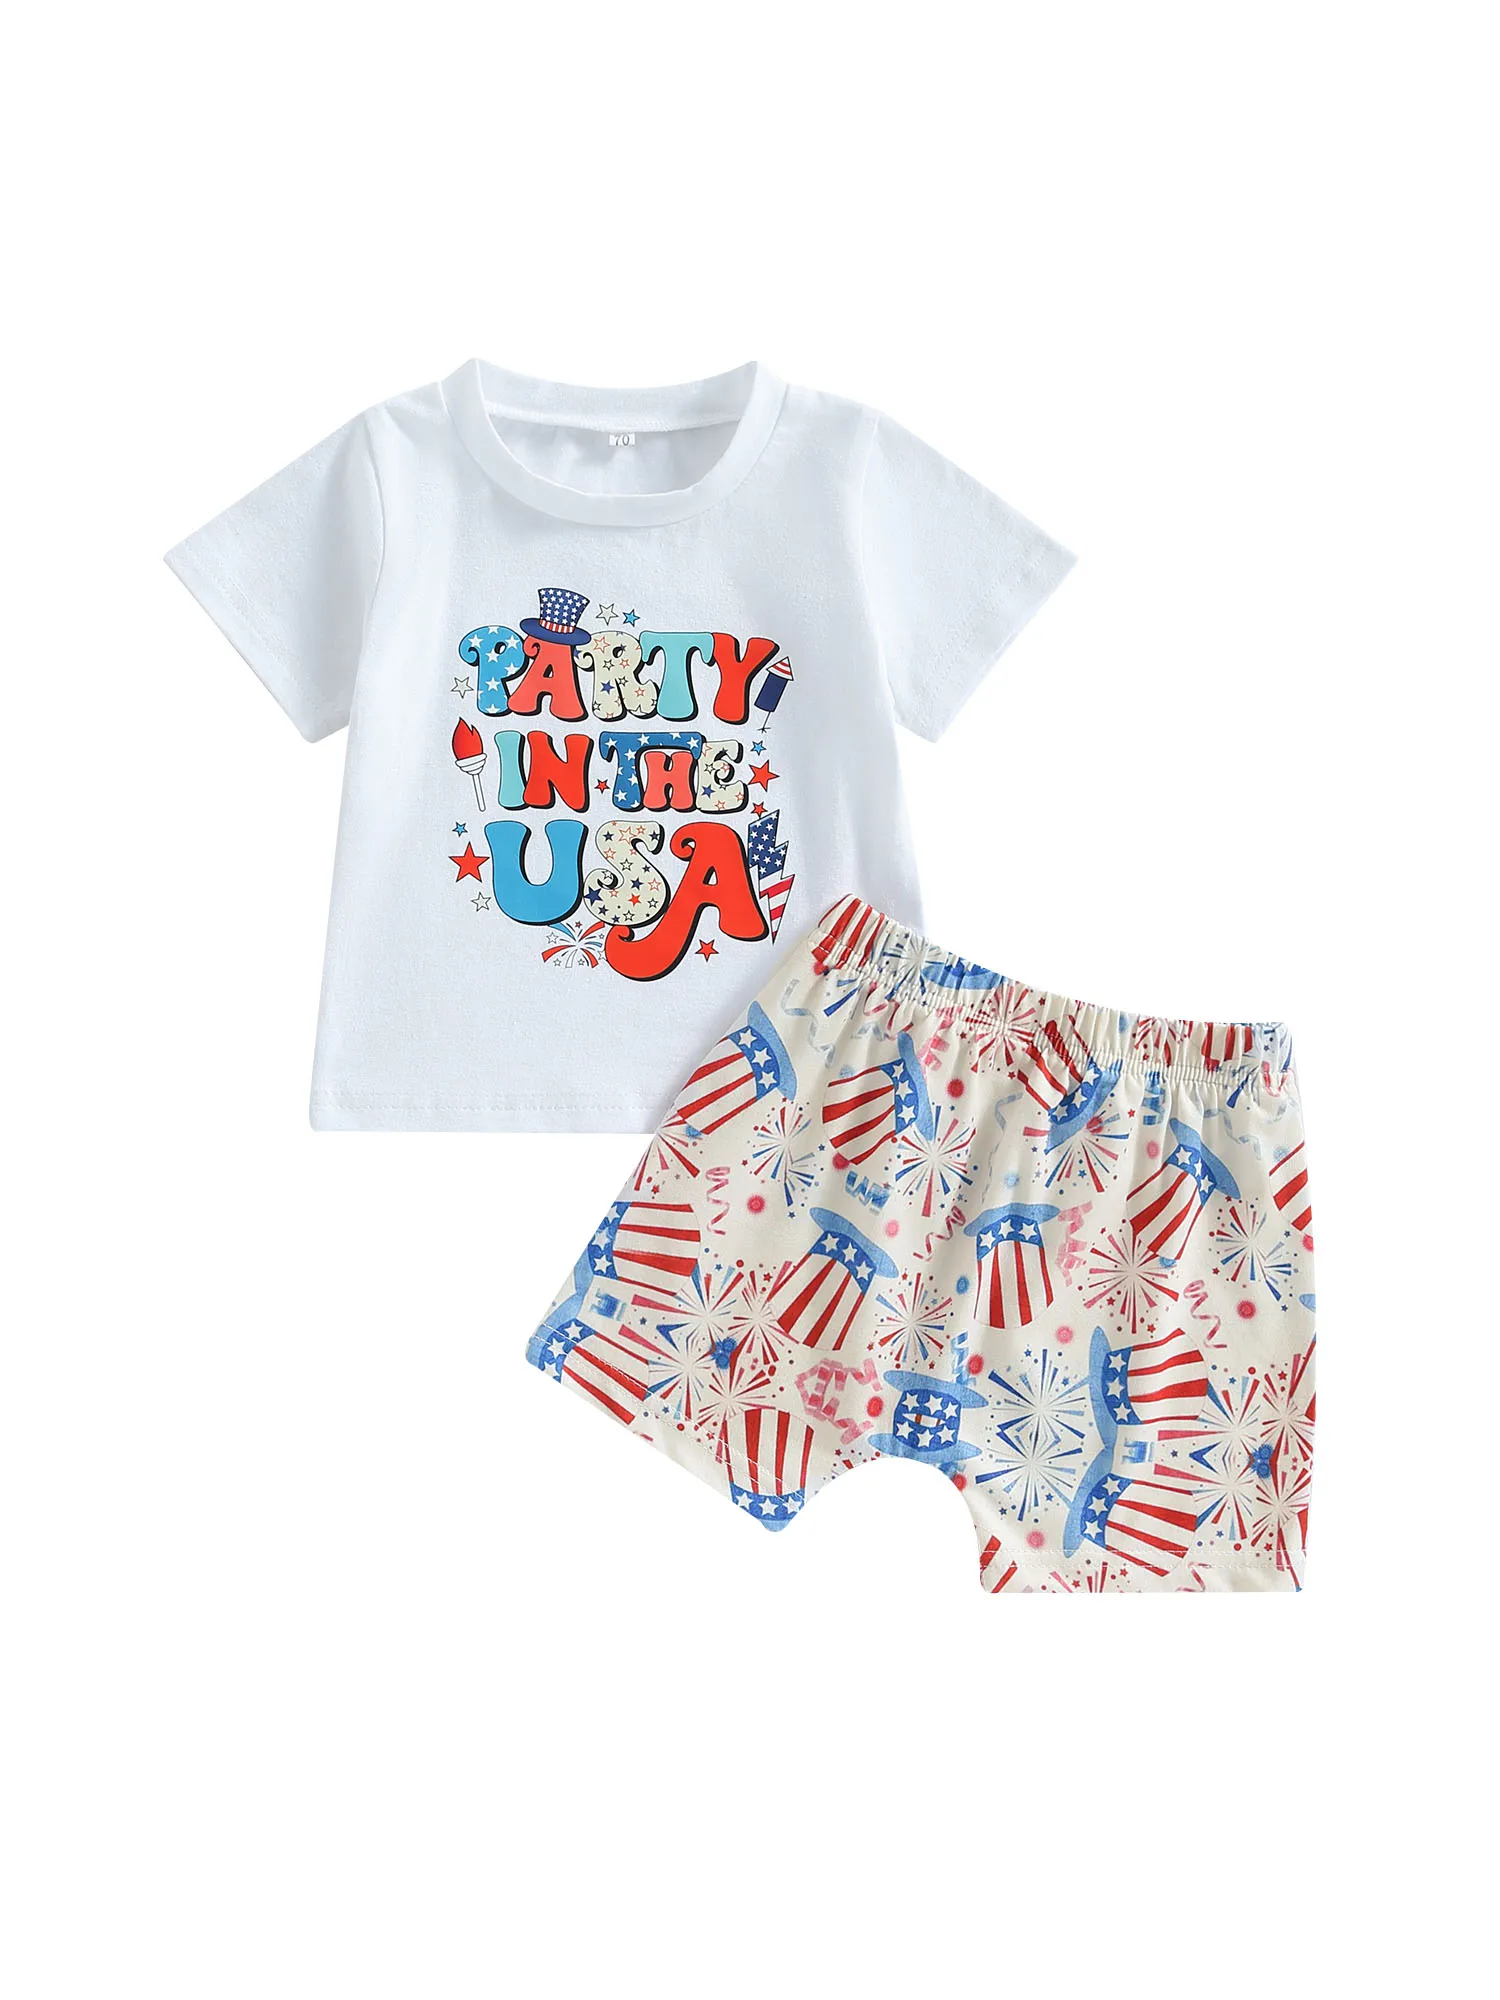 

Omkzanbi 4th of July Baby Boy Outfit American Cowboy T-Shirt Jogger Shorts Toddlers Independence Day Western Summer Clothes